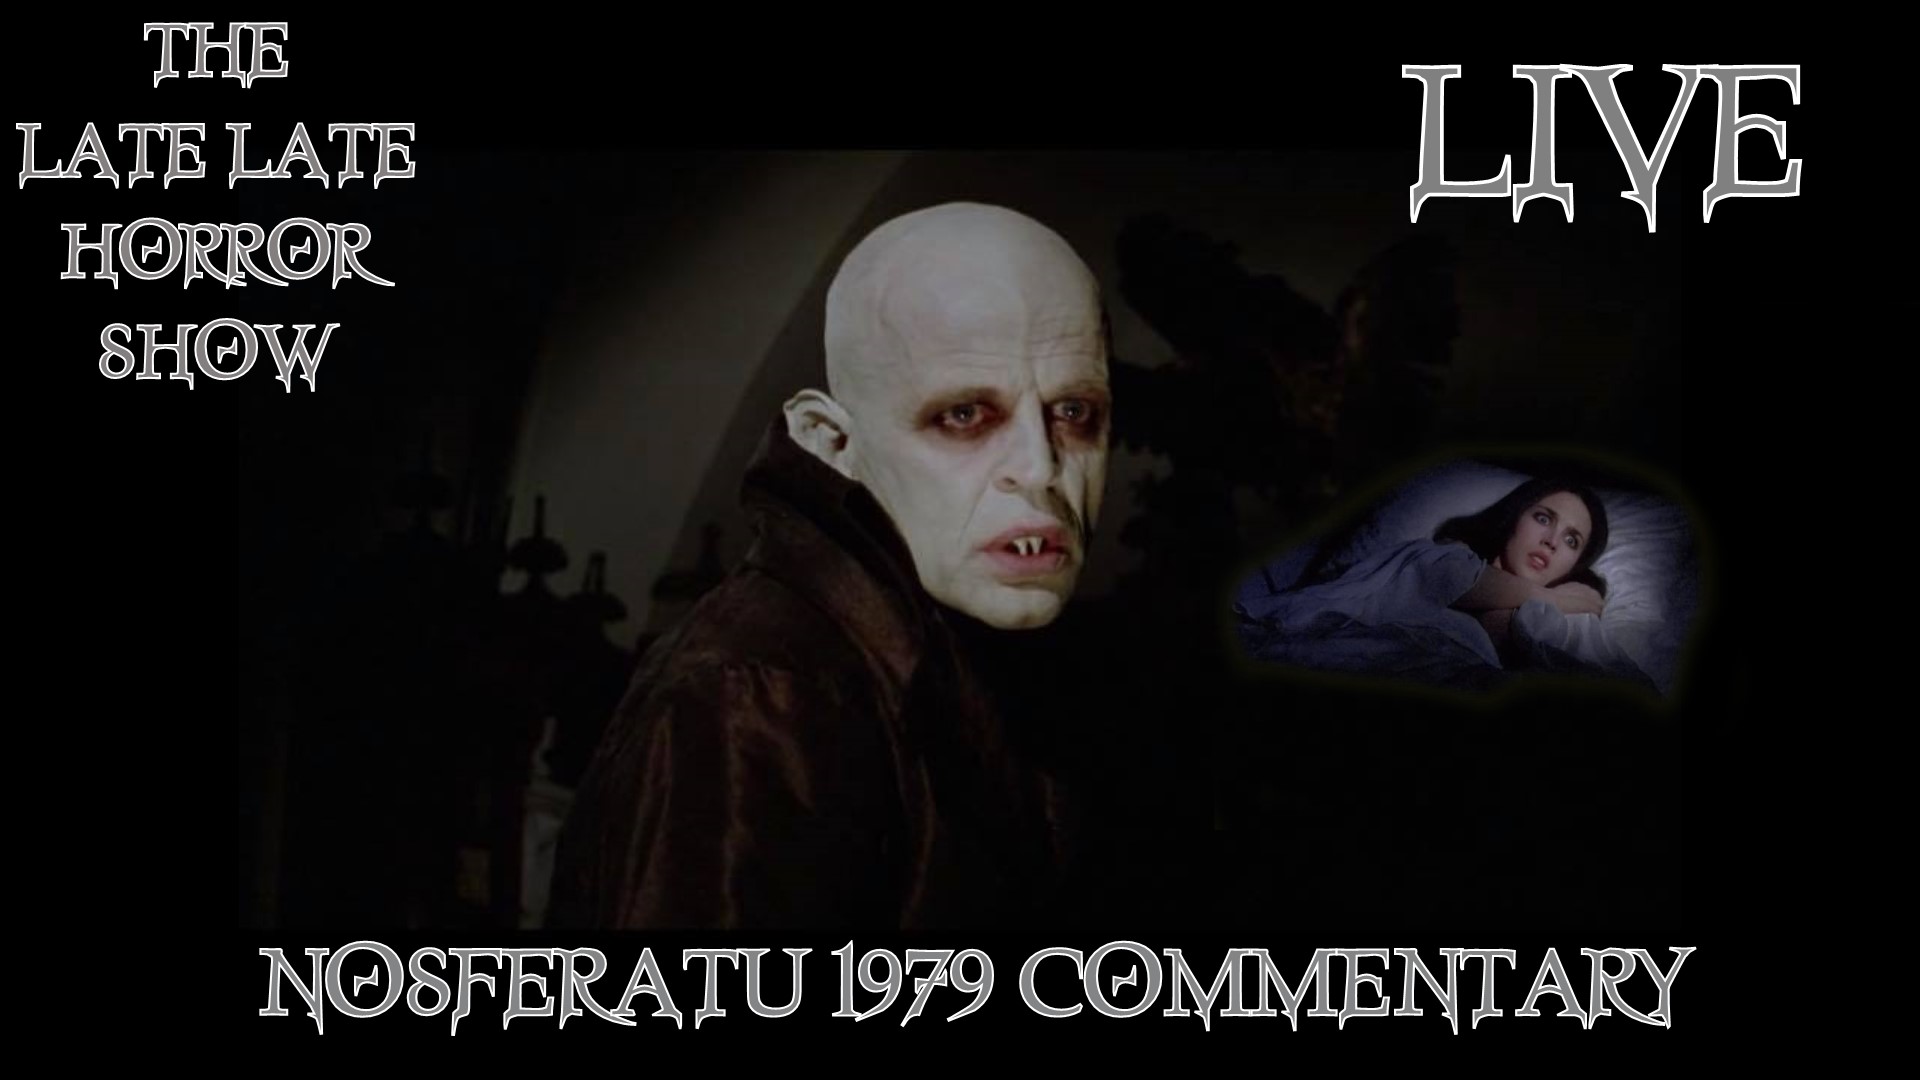 THE LATE LATE HORROR SHOW MONDAY MADNESS Munchies 1987 Commentary Banter